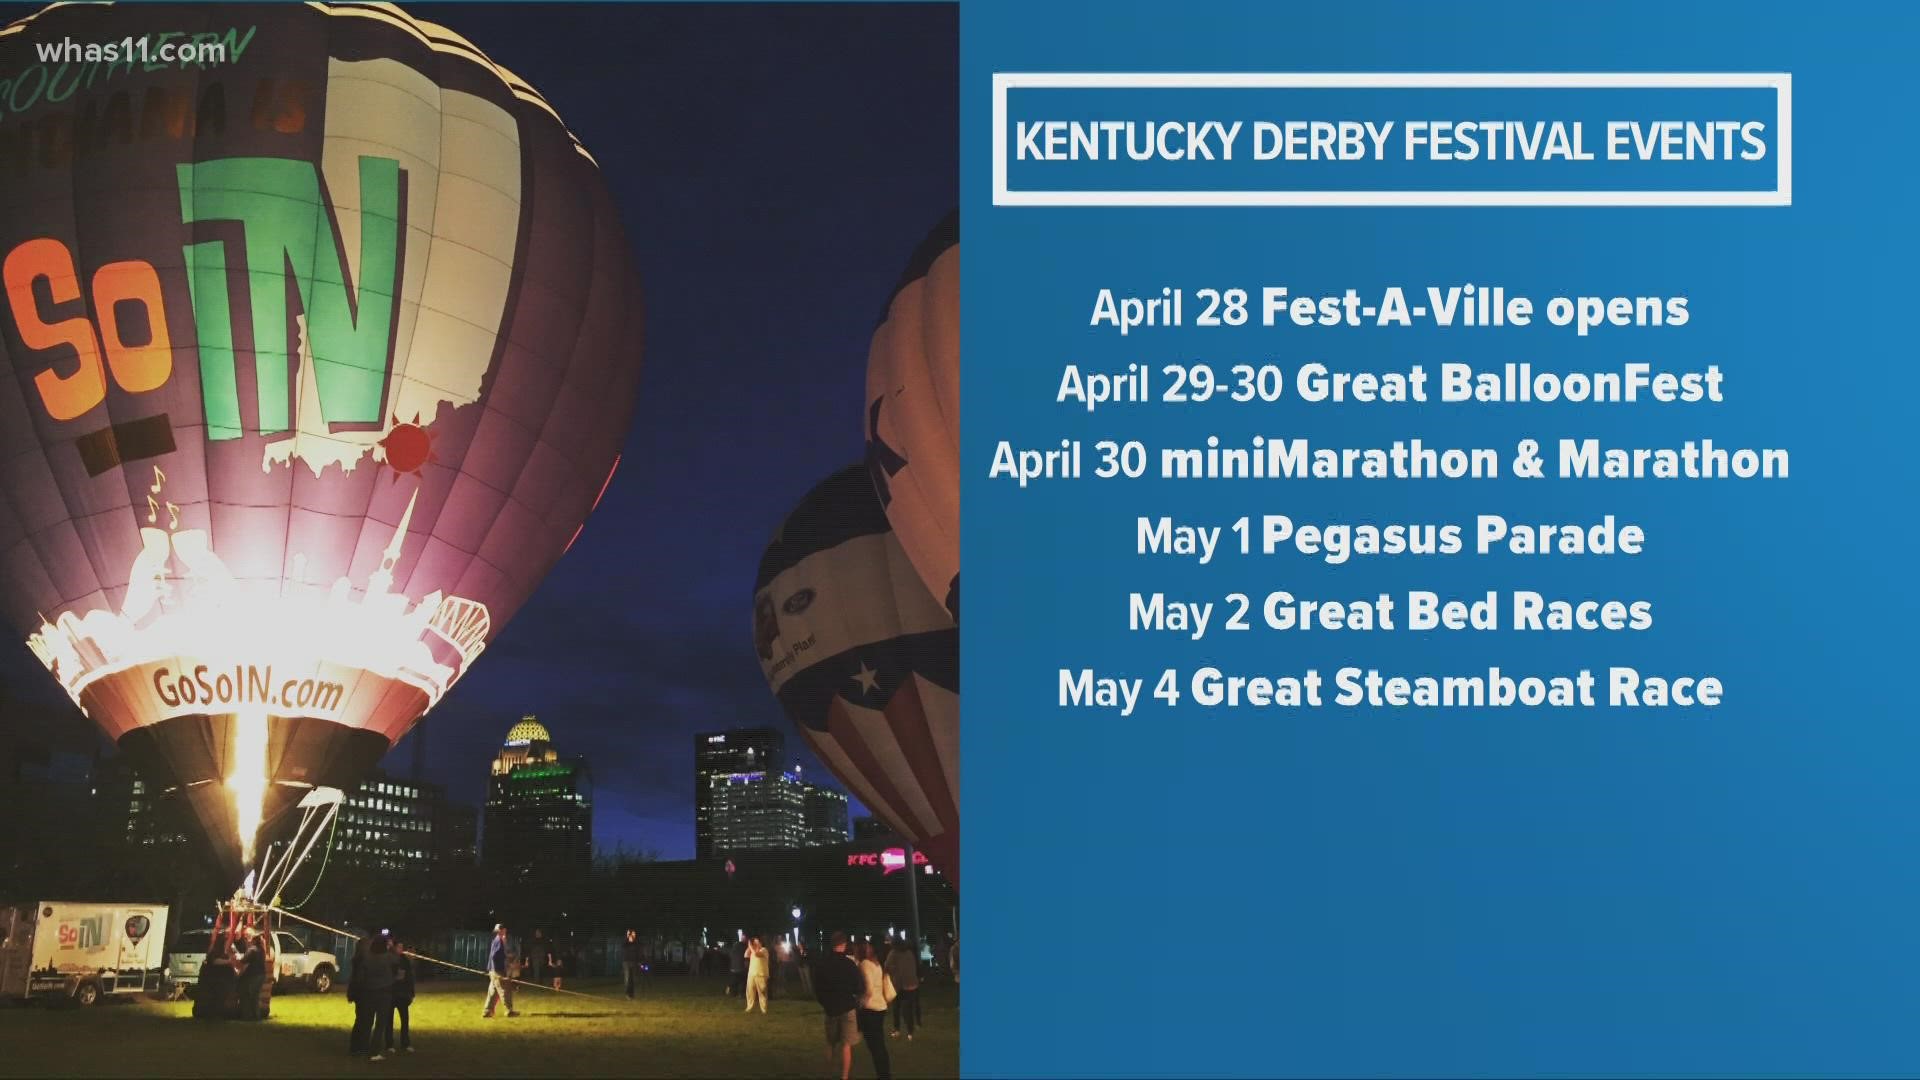 The Pegasus Parade is no longer the Thursday before Derby. This year, it's the Sunday before.